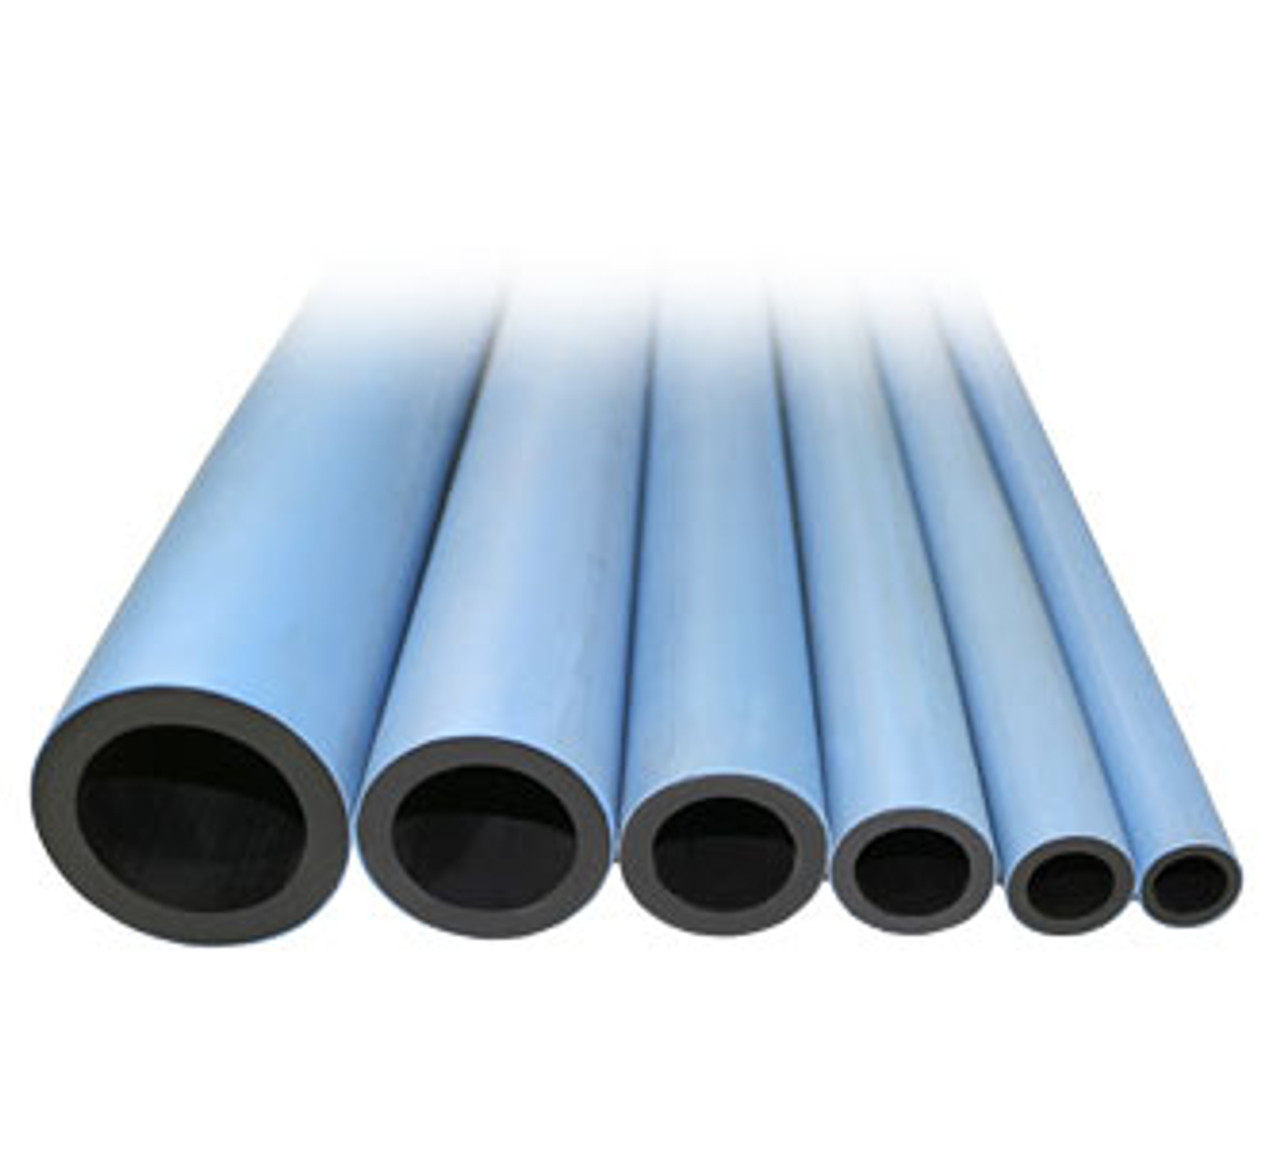 UltraAir HDPE Poly Pipe Lengths 6m Lenghts , O.D 20